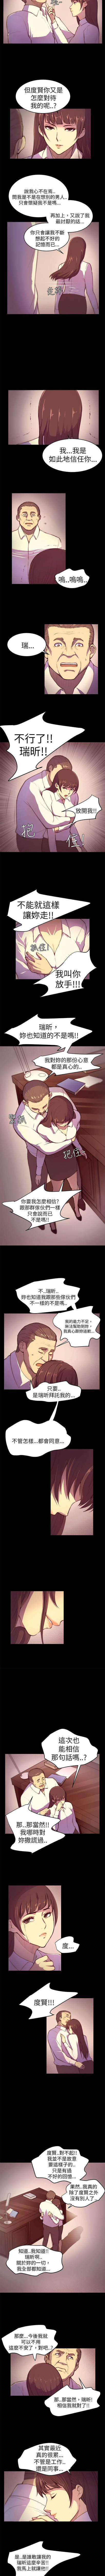 From 斯德哥爾摩症候群 1-40 Compilation - Page 11